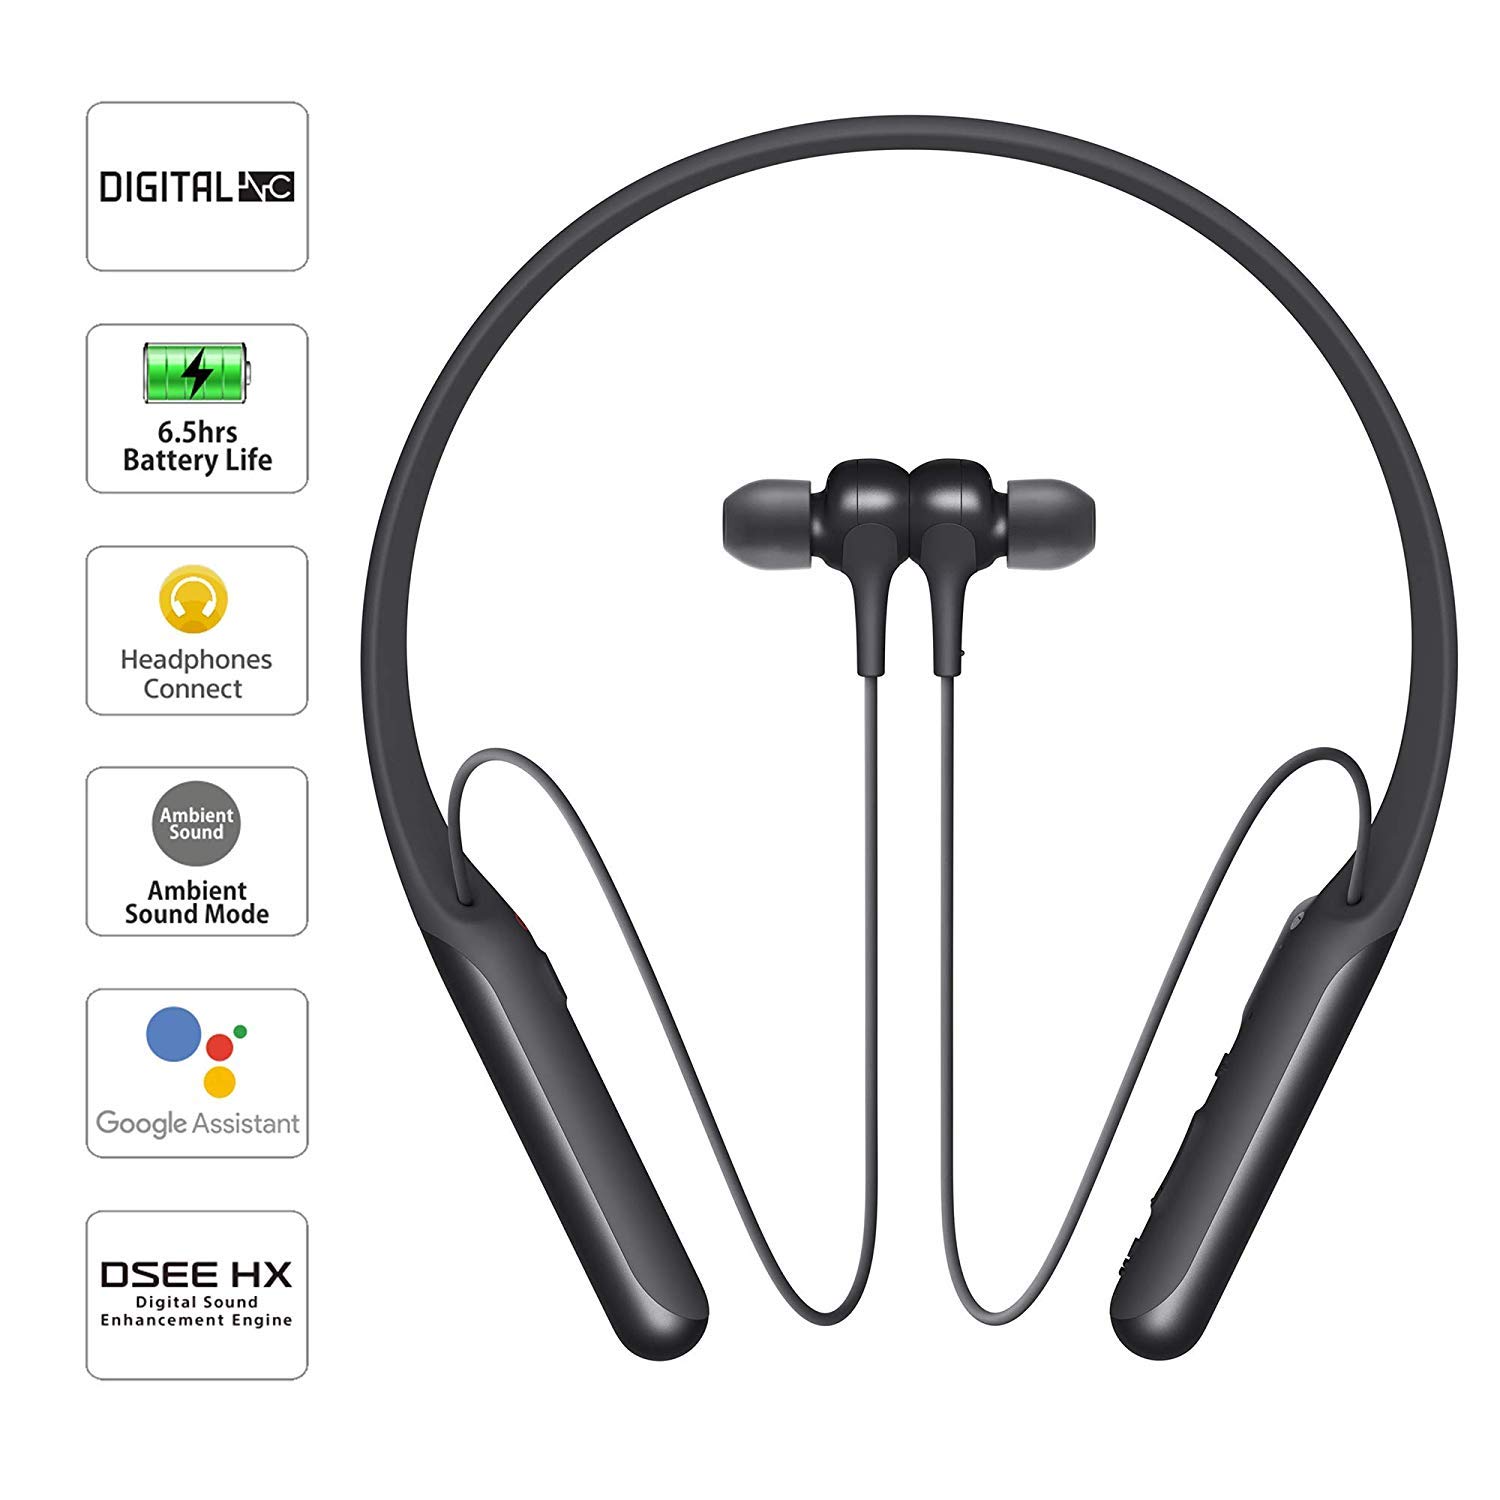 sony wi-c600n price in india, sony wi-c600n ONLINE PRICE IN INDIA, sony wi-c600n wireless bluetooth noise cancelling earphones, sony wi-c600n bluetooth headset with mic, sony wi-c600n features & specifications, sony wi-c600n best prize in india, sony wi-c600n neckband, sony wi-c600n on discountdeals4you,